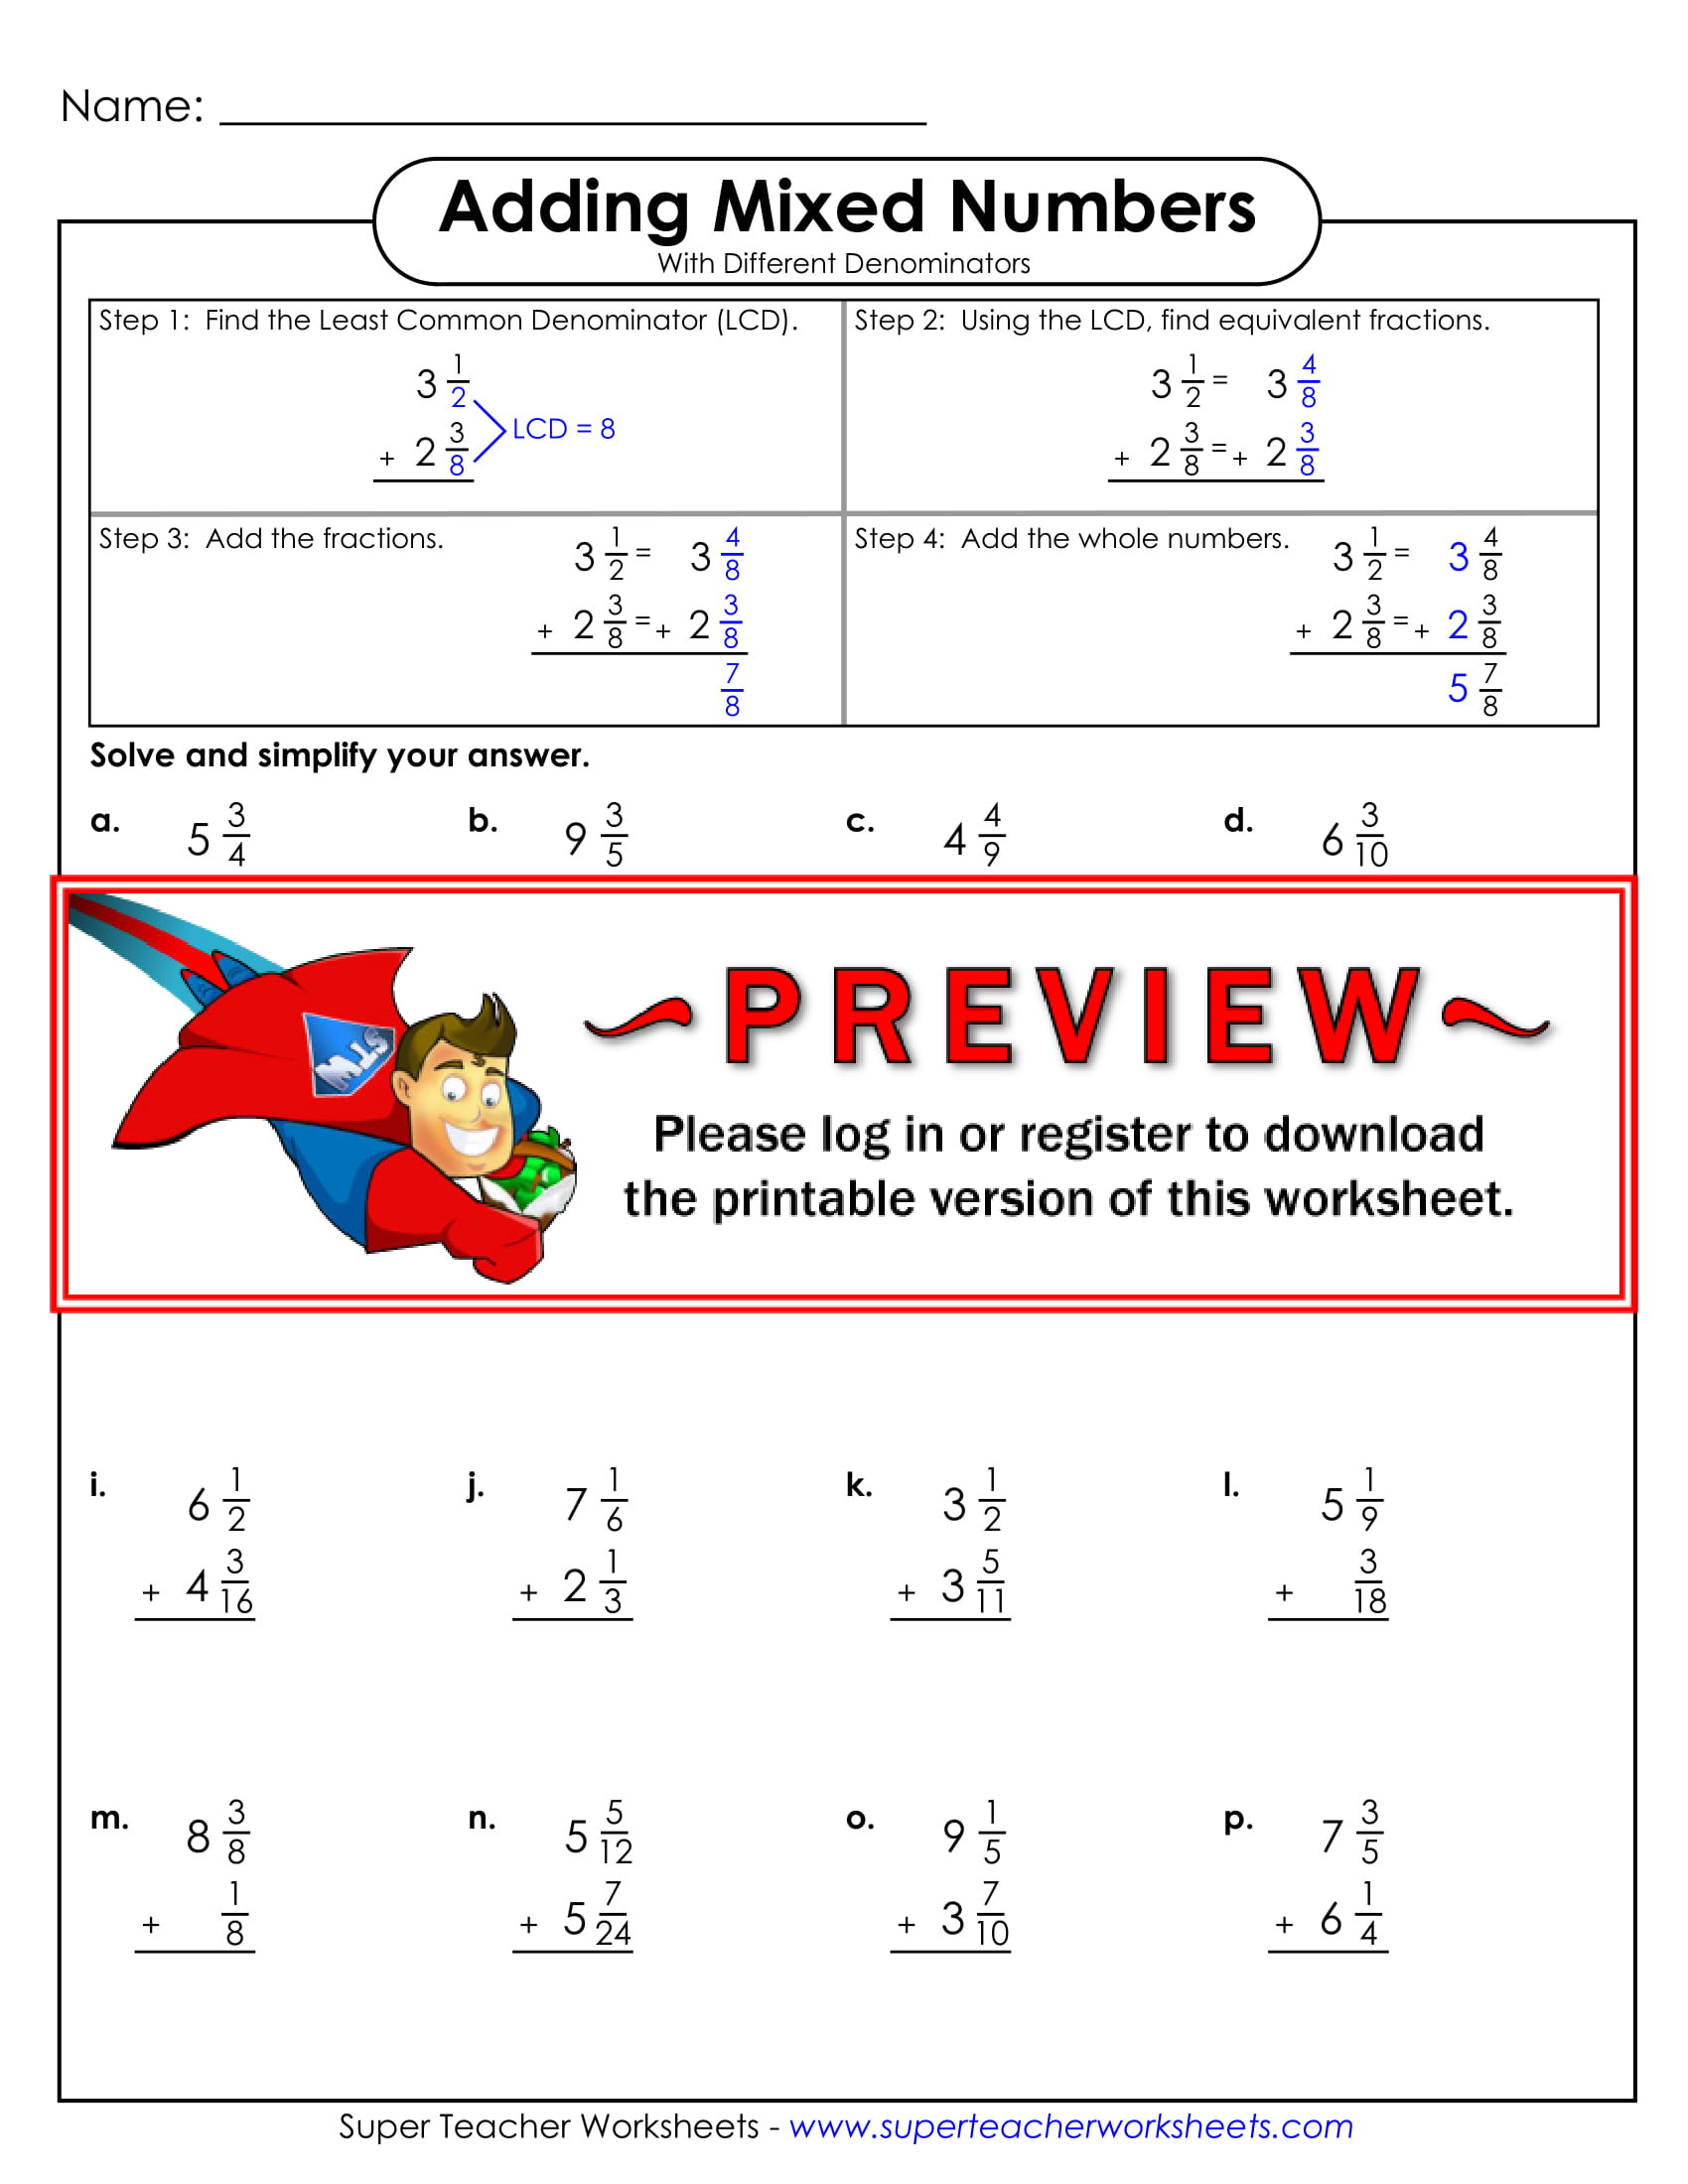 Adding Fractions Worksheet Pdf Fraction Worksheets Examples Pdf Mixed Numbers Super Teacher